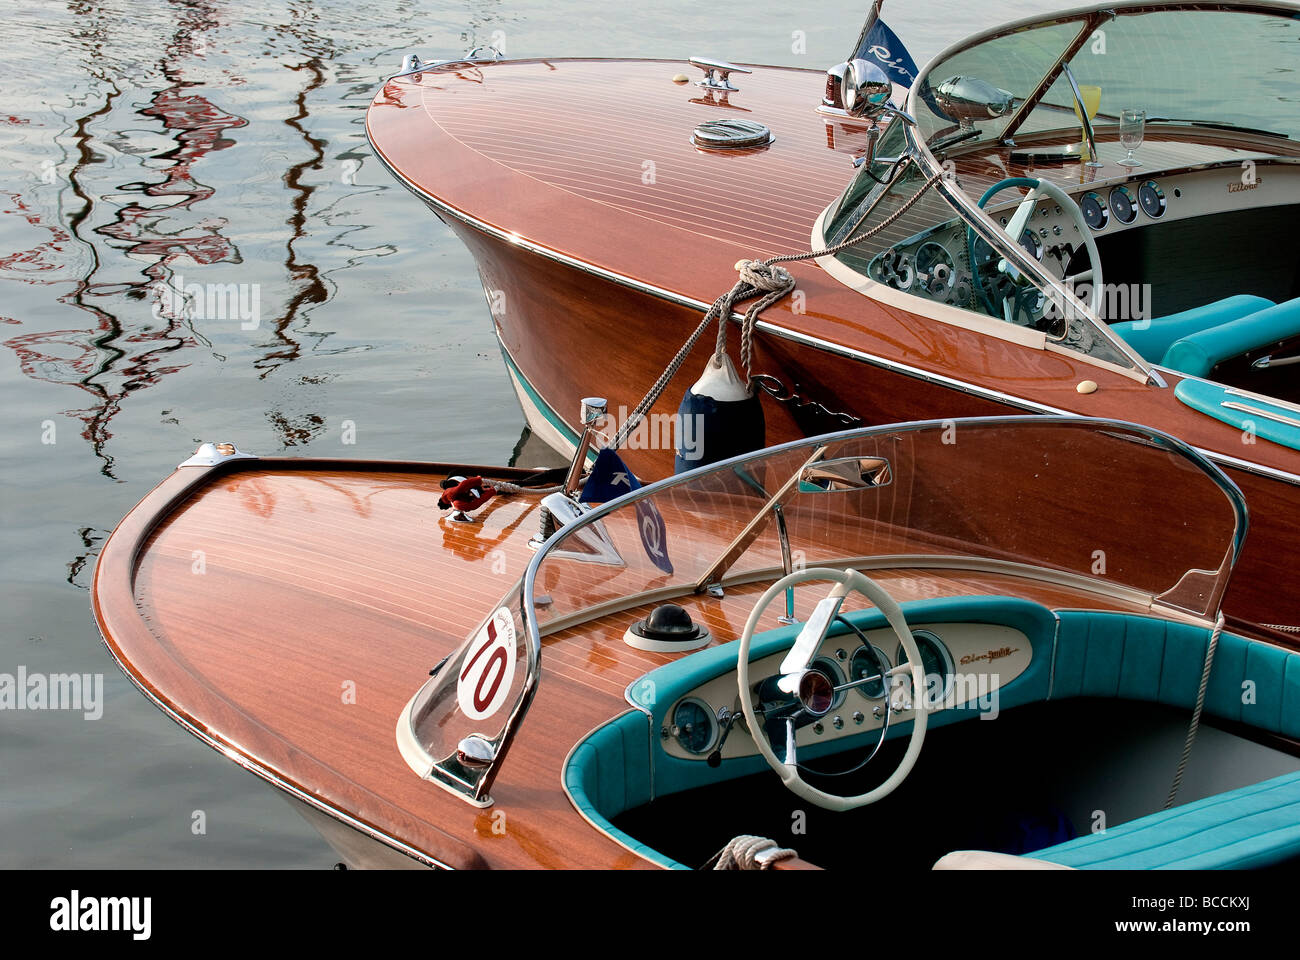 Riva Boat France High Resolution Stock Photography And Images Alamy